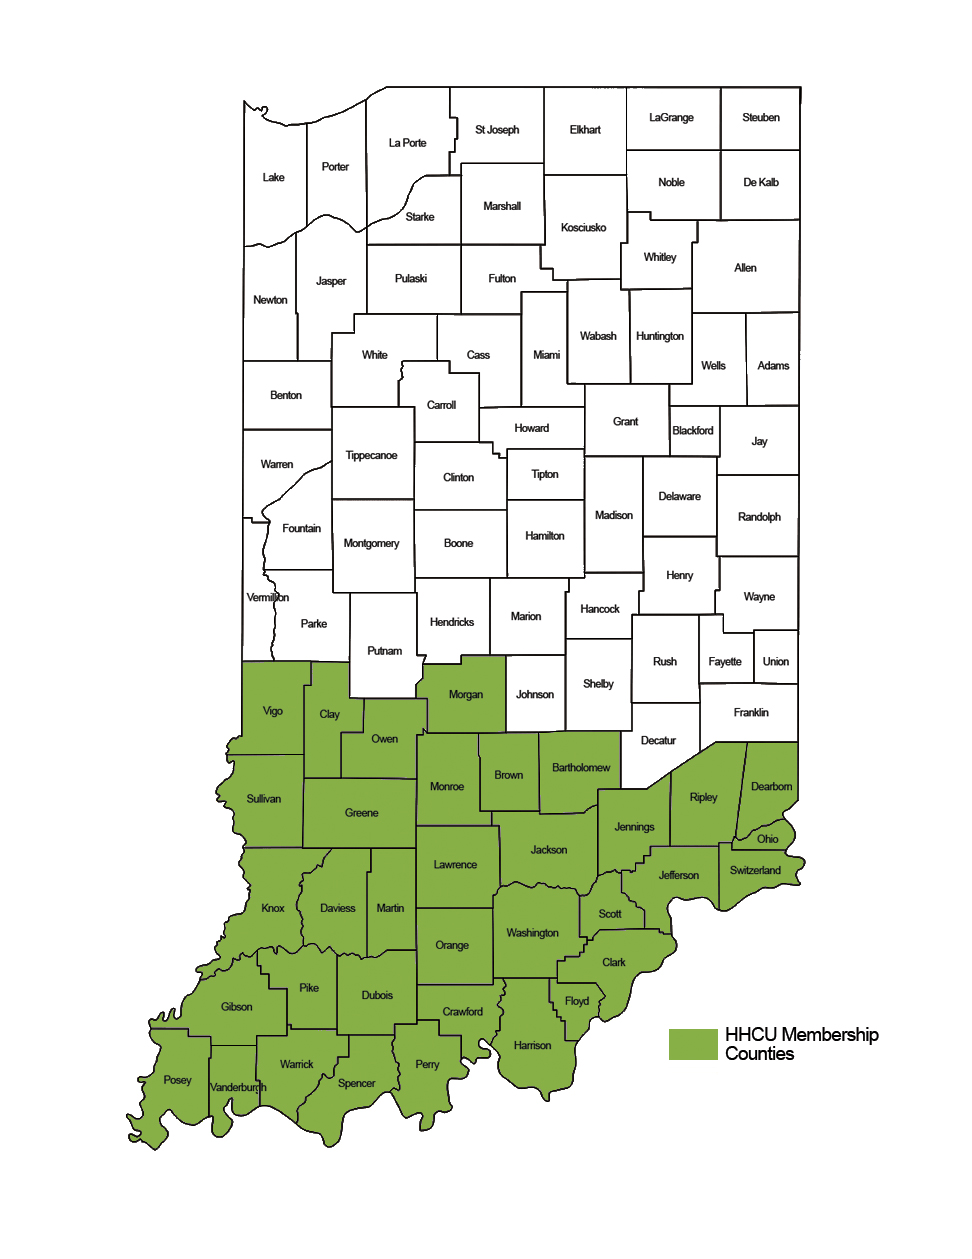 HH_Indiana Counties_8.18 - Copy.jpg